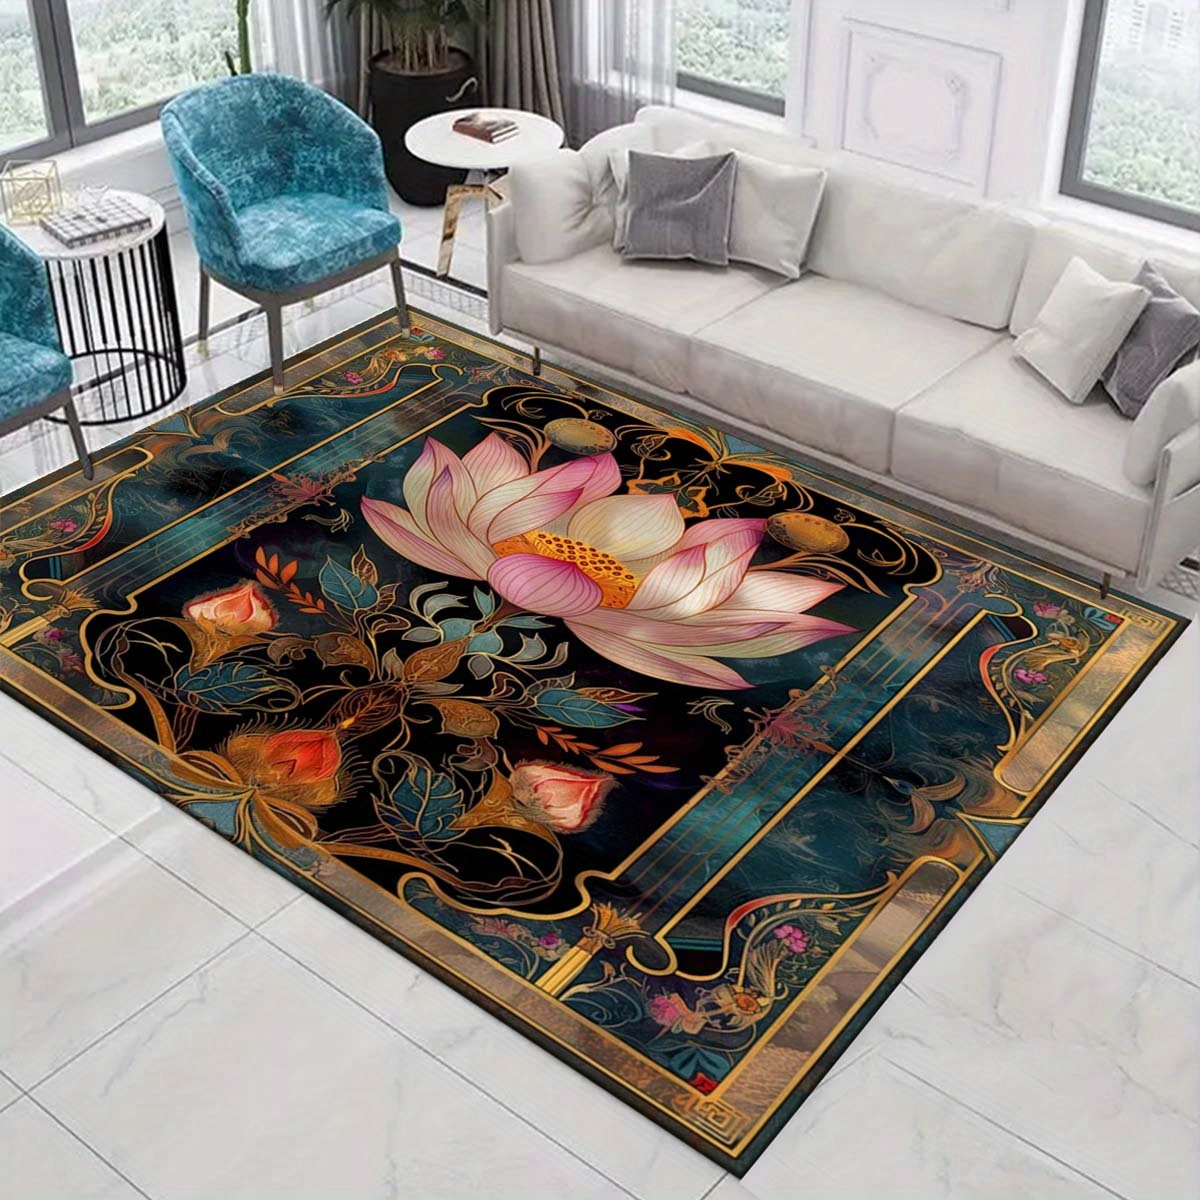 

For Lotus Pattern Decorative Carpet For Living Room, Hallway, Outdoor, Hotel Patio & Factory - Polyester Large Area Floor Mat, 2.16m² Minimum, 1.8m Longest Side - 1pc